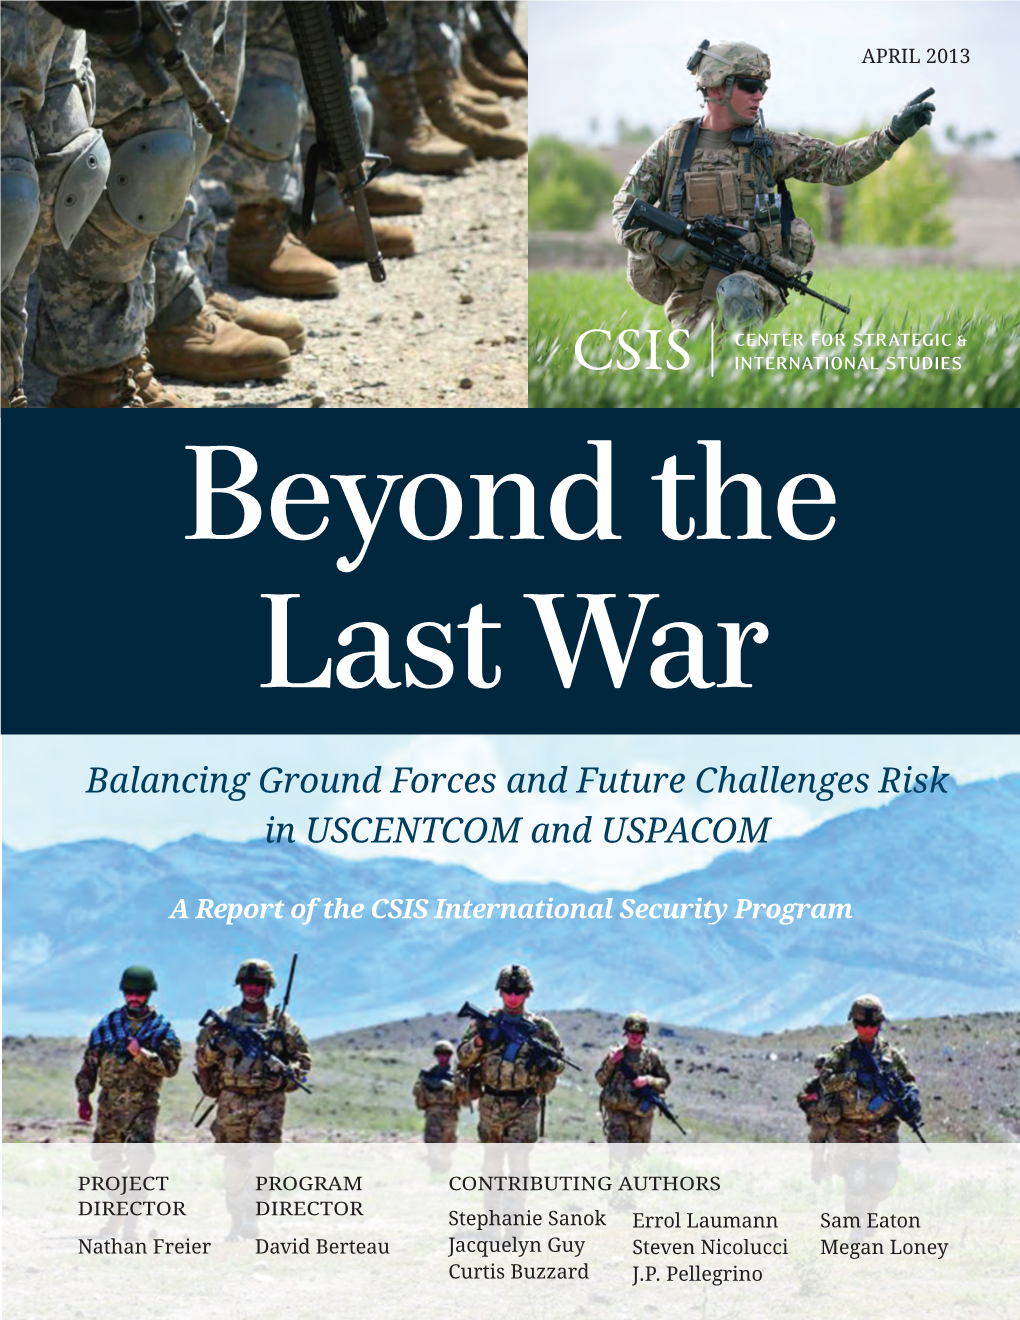 Beyond the Last War: Balancing Ground Forces and Future